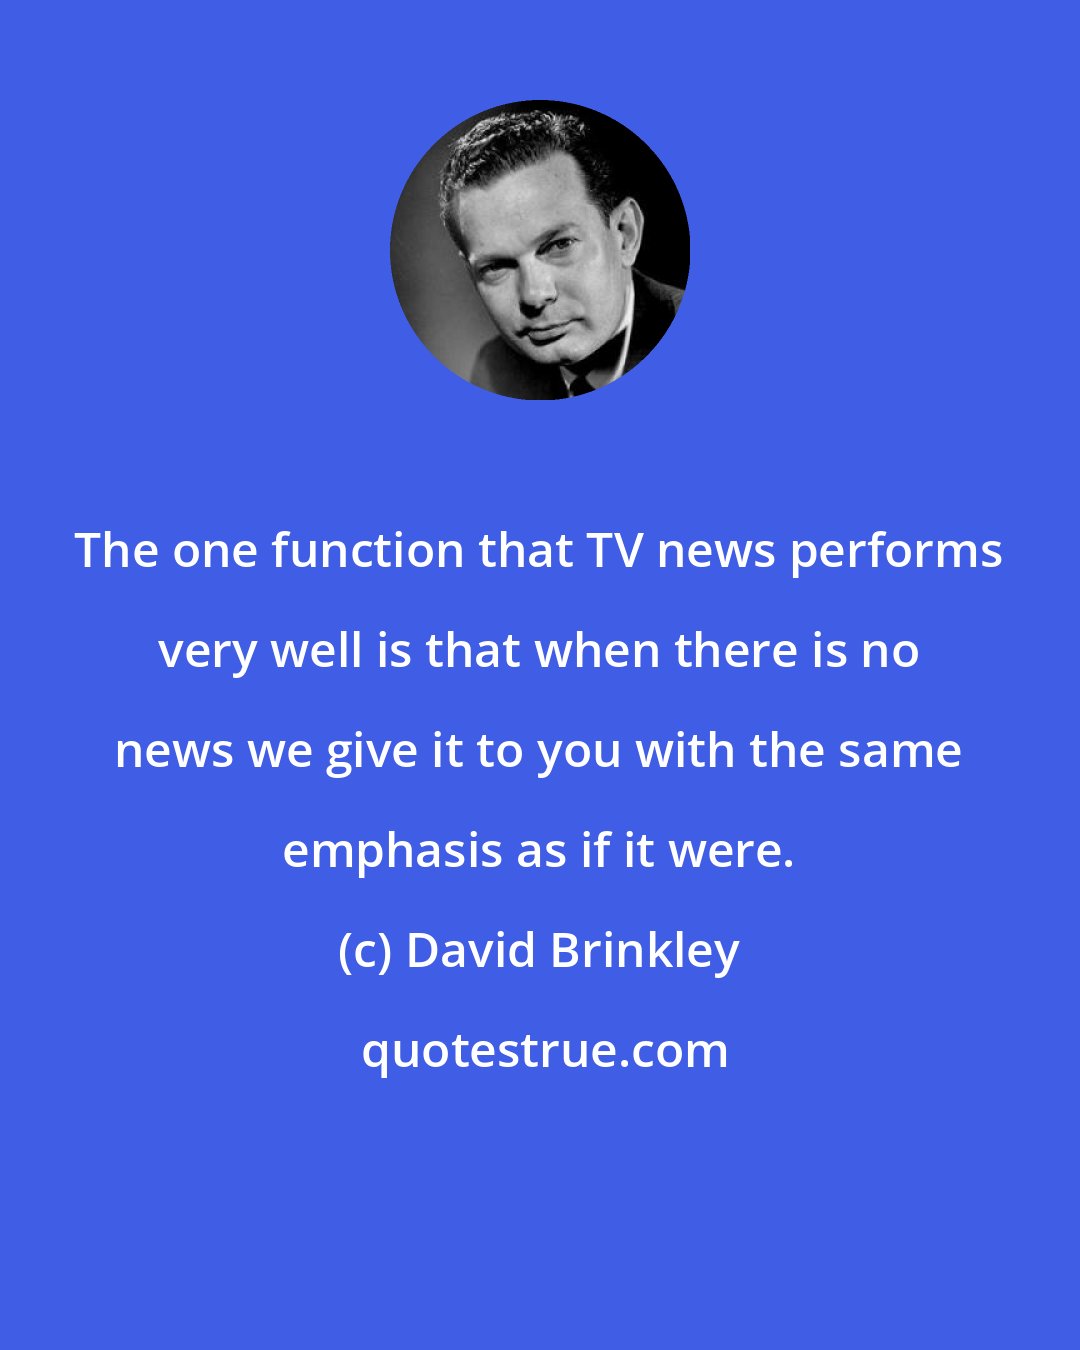 David Brinkley: The one function that TV news performs very well is that when there is no news we give it to you with the same emphasis as if it were.